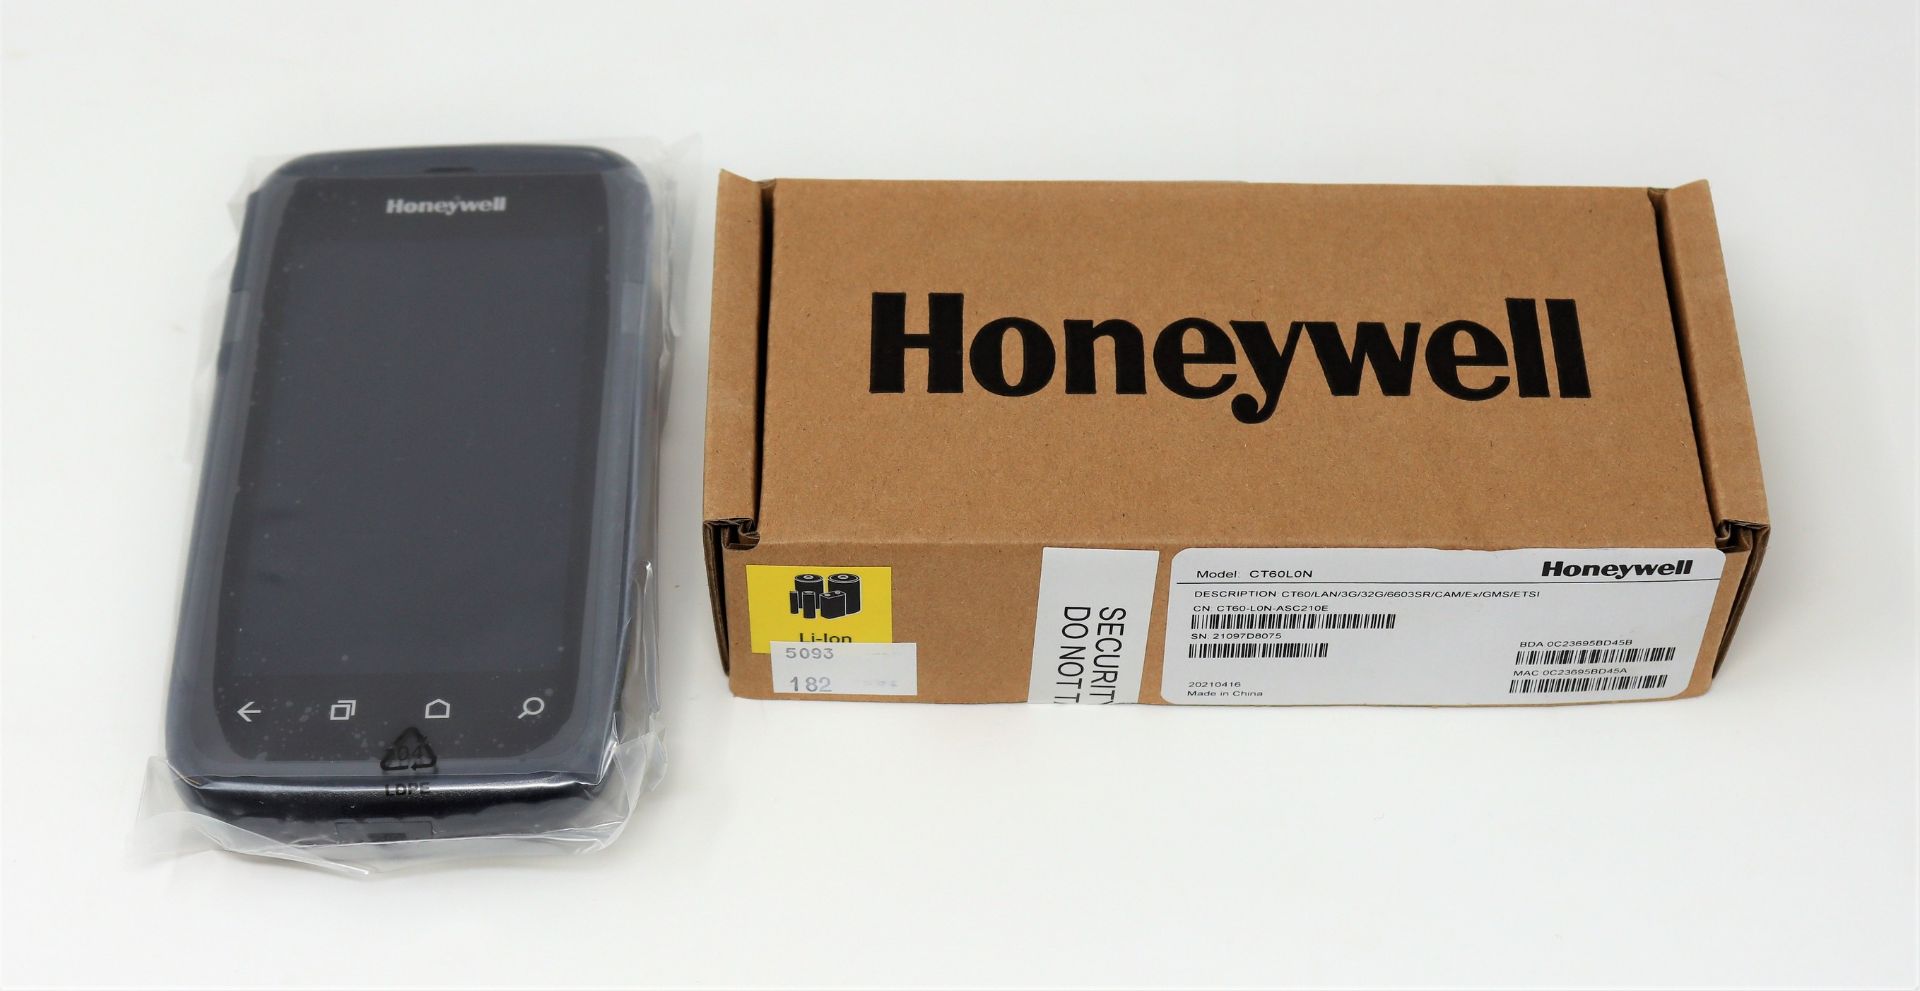 A boxed as new Honeywell Dolphin CT60 Mobile Computer with battery included (P/N: CT60-L0N-